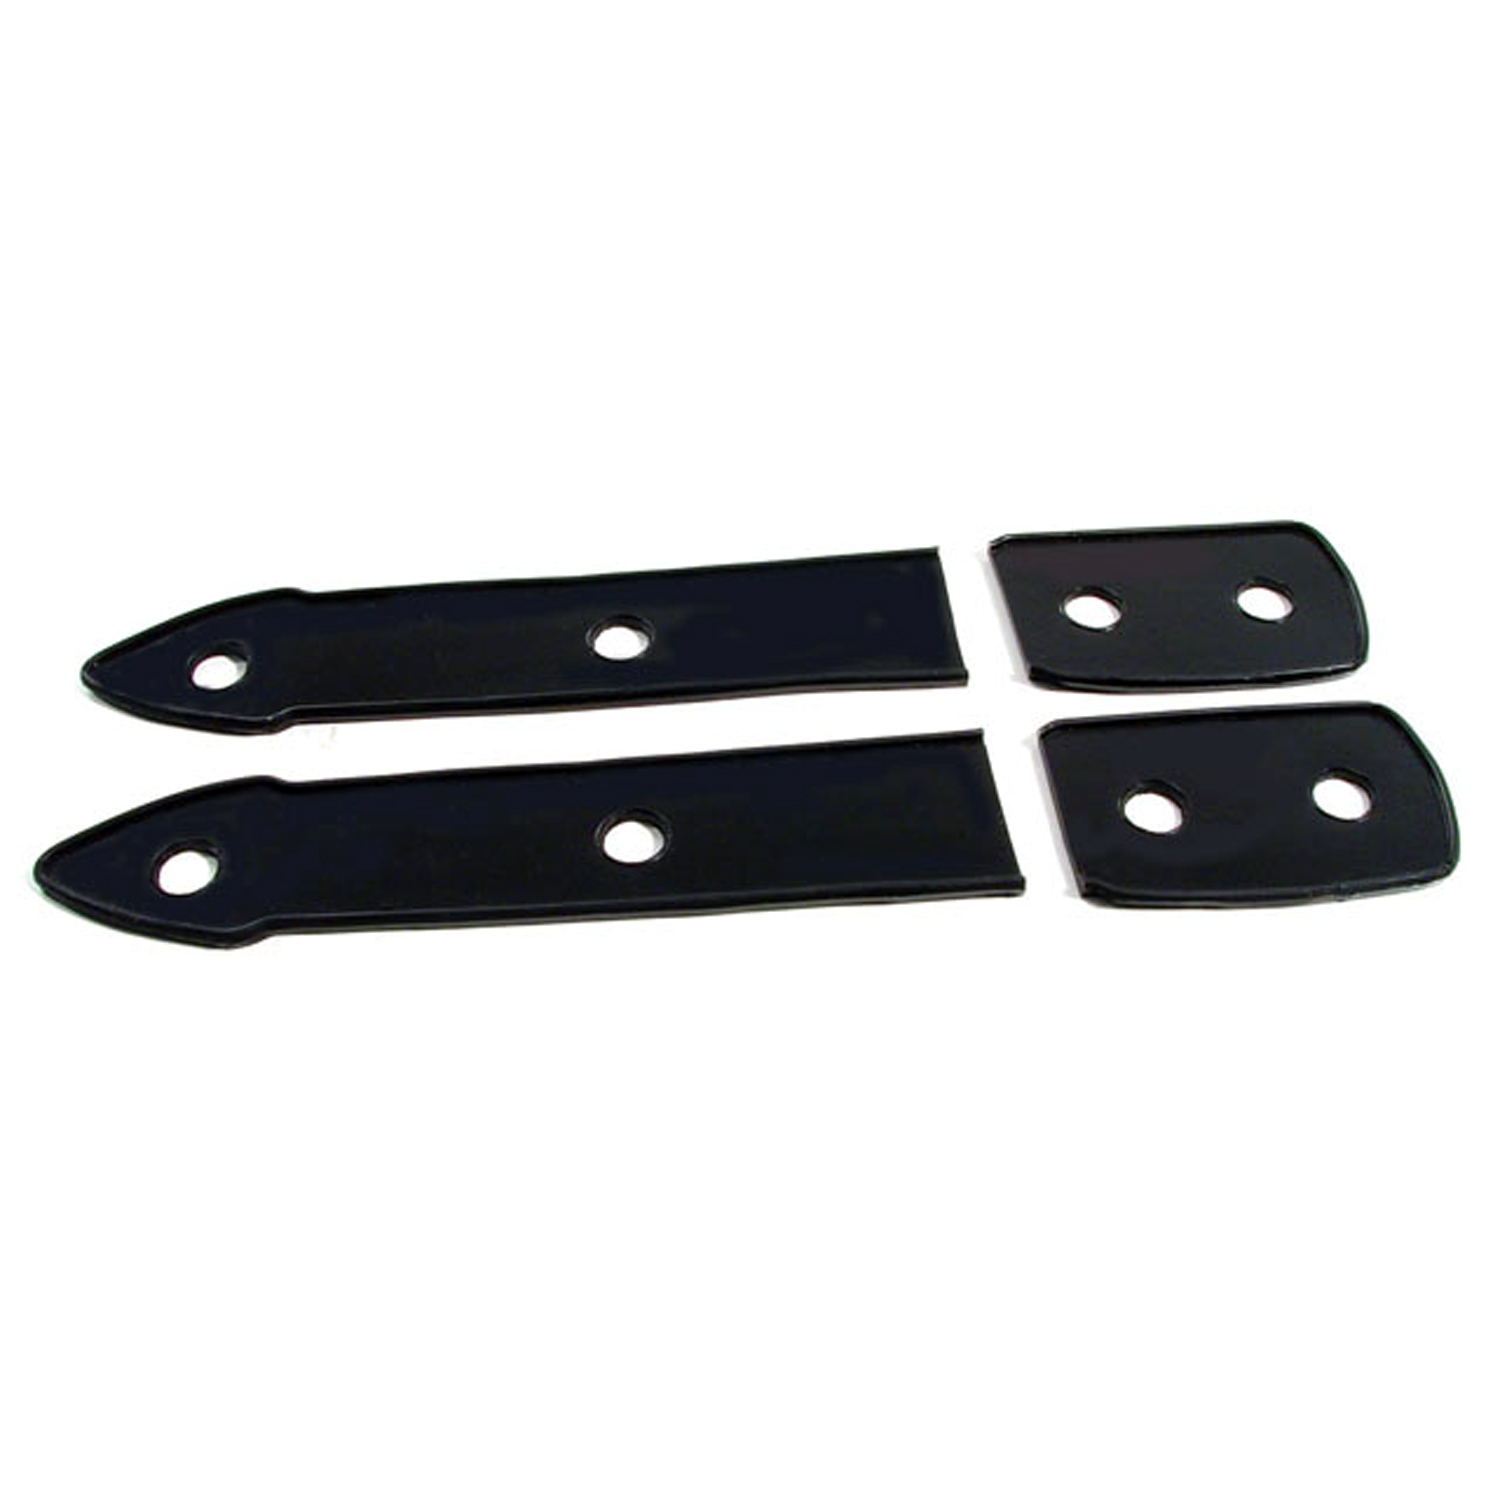 1938 Buick Limited Series 90 Trunk Hinge Pads.  1-5/8 wide X 8-3/8 long.  4-Piece Set-MP 335-B